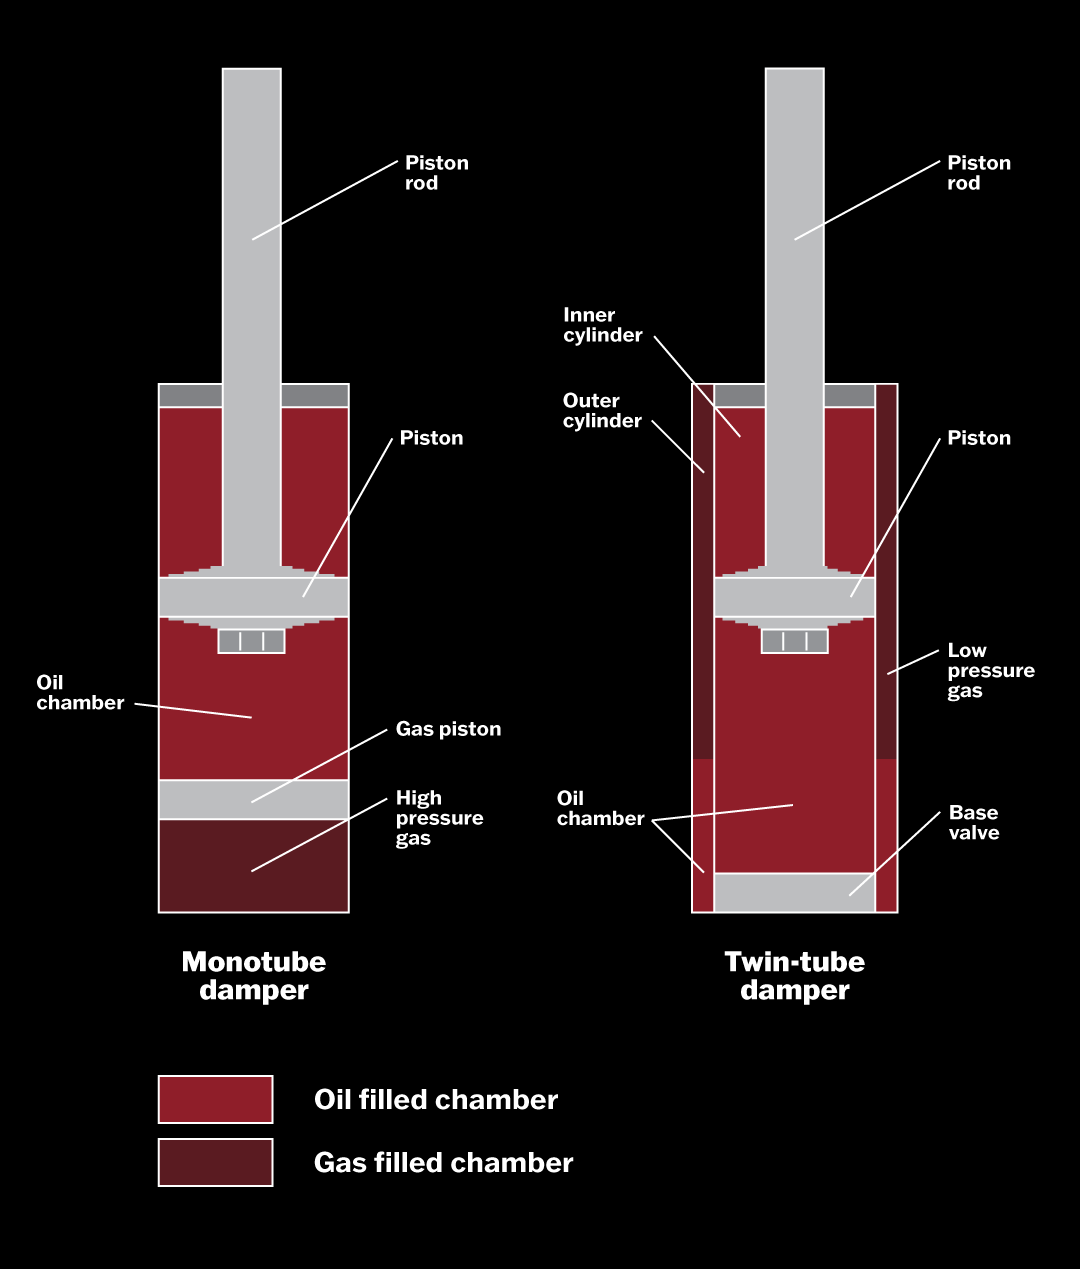 What is a monotube damper?